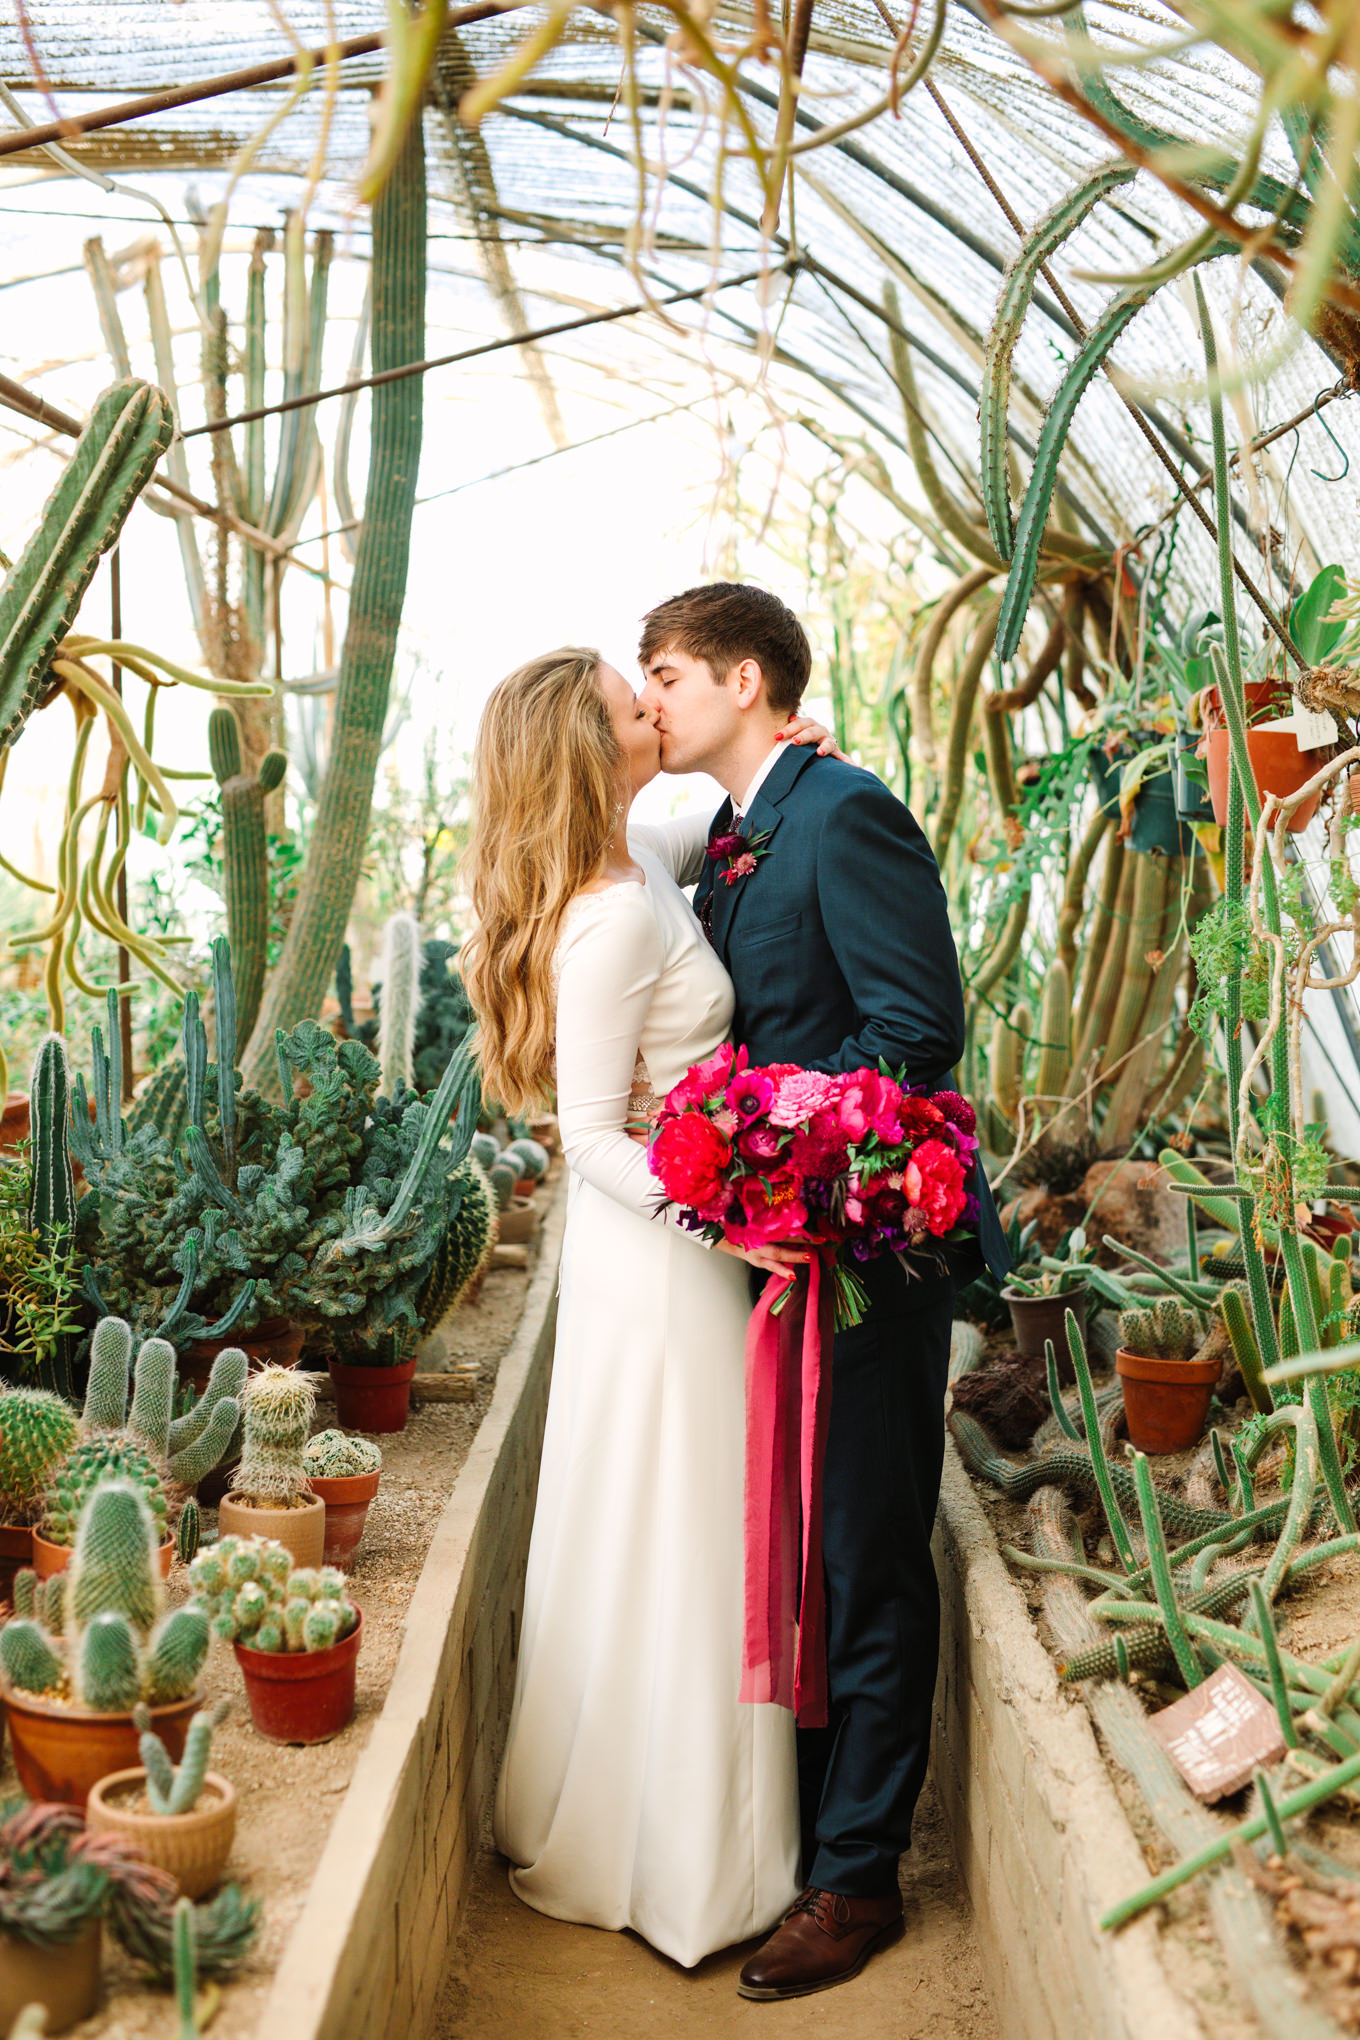 Bride and groom at Moorten Botanical Garden | Colorful jewel tone Palm Springs elopement | Fresh and colorful photography for fun-loving couples in Southern California | #colorfulelopement #palmspringselopement #elopementphotography #palmspringswedding Source: Mary Costa Photography | Los Angeles